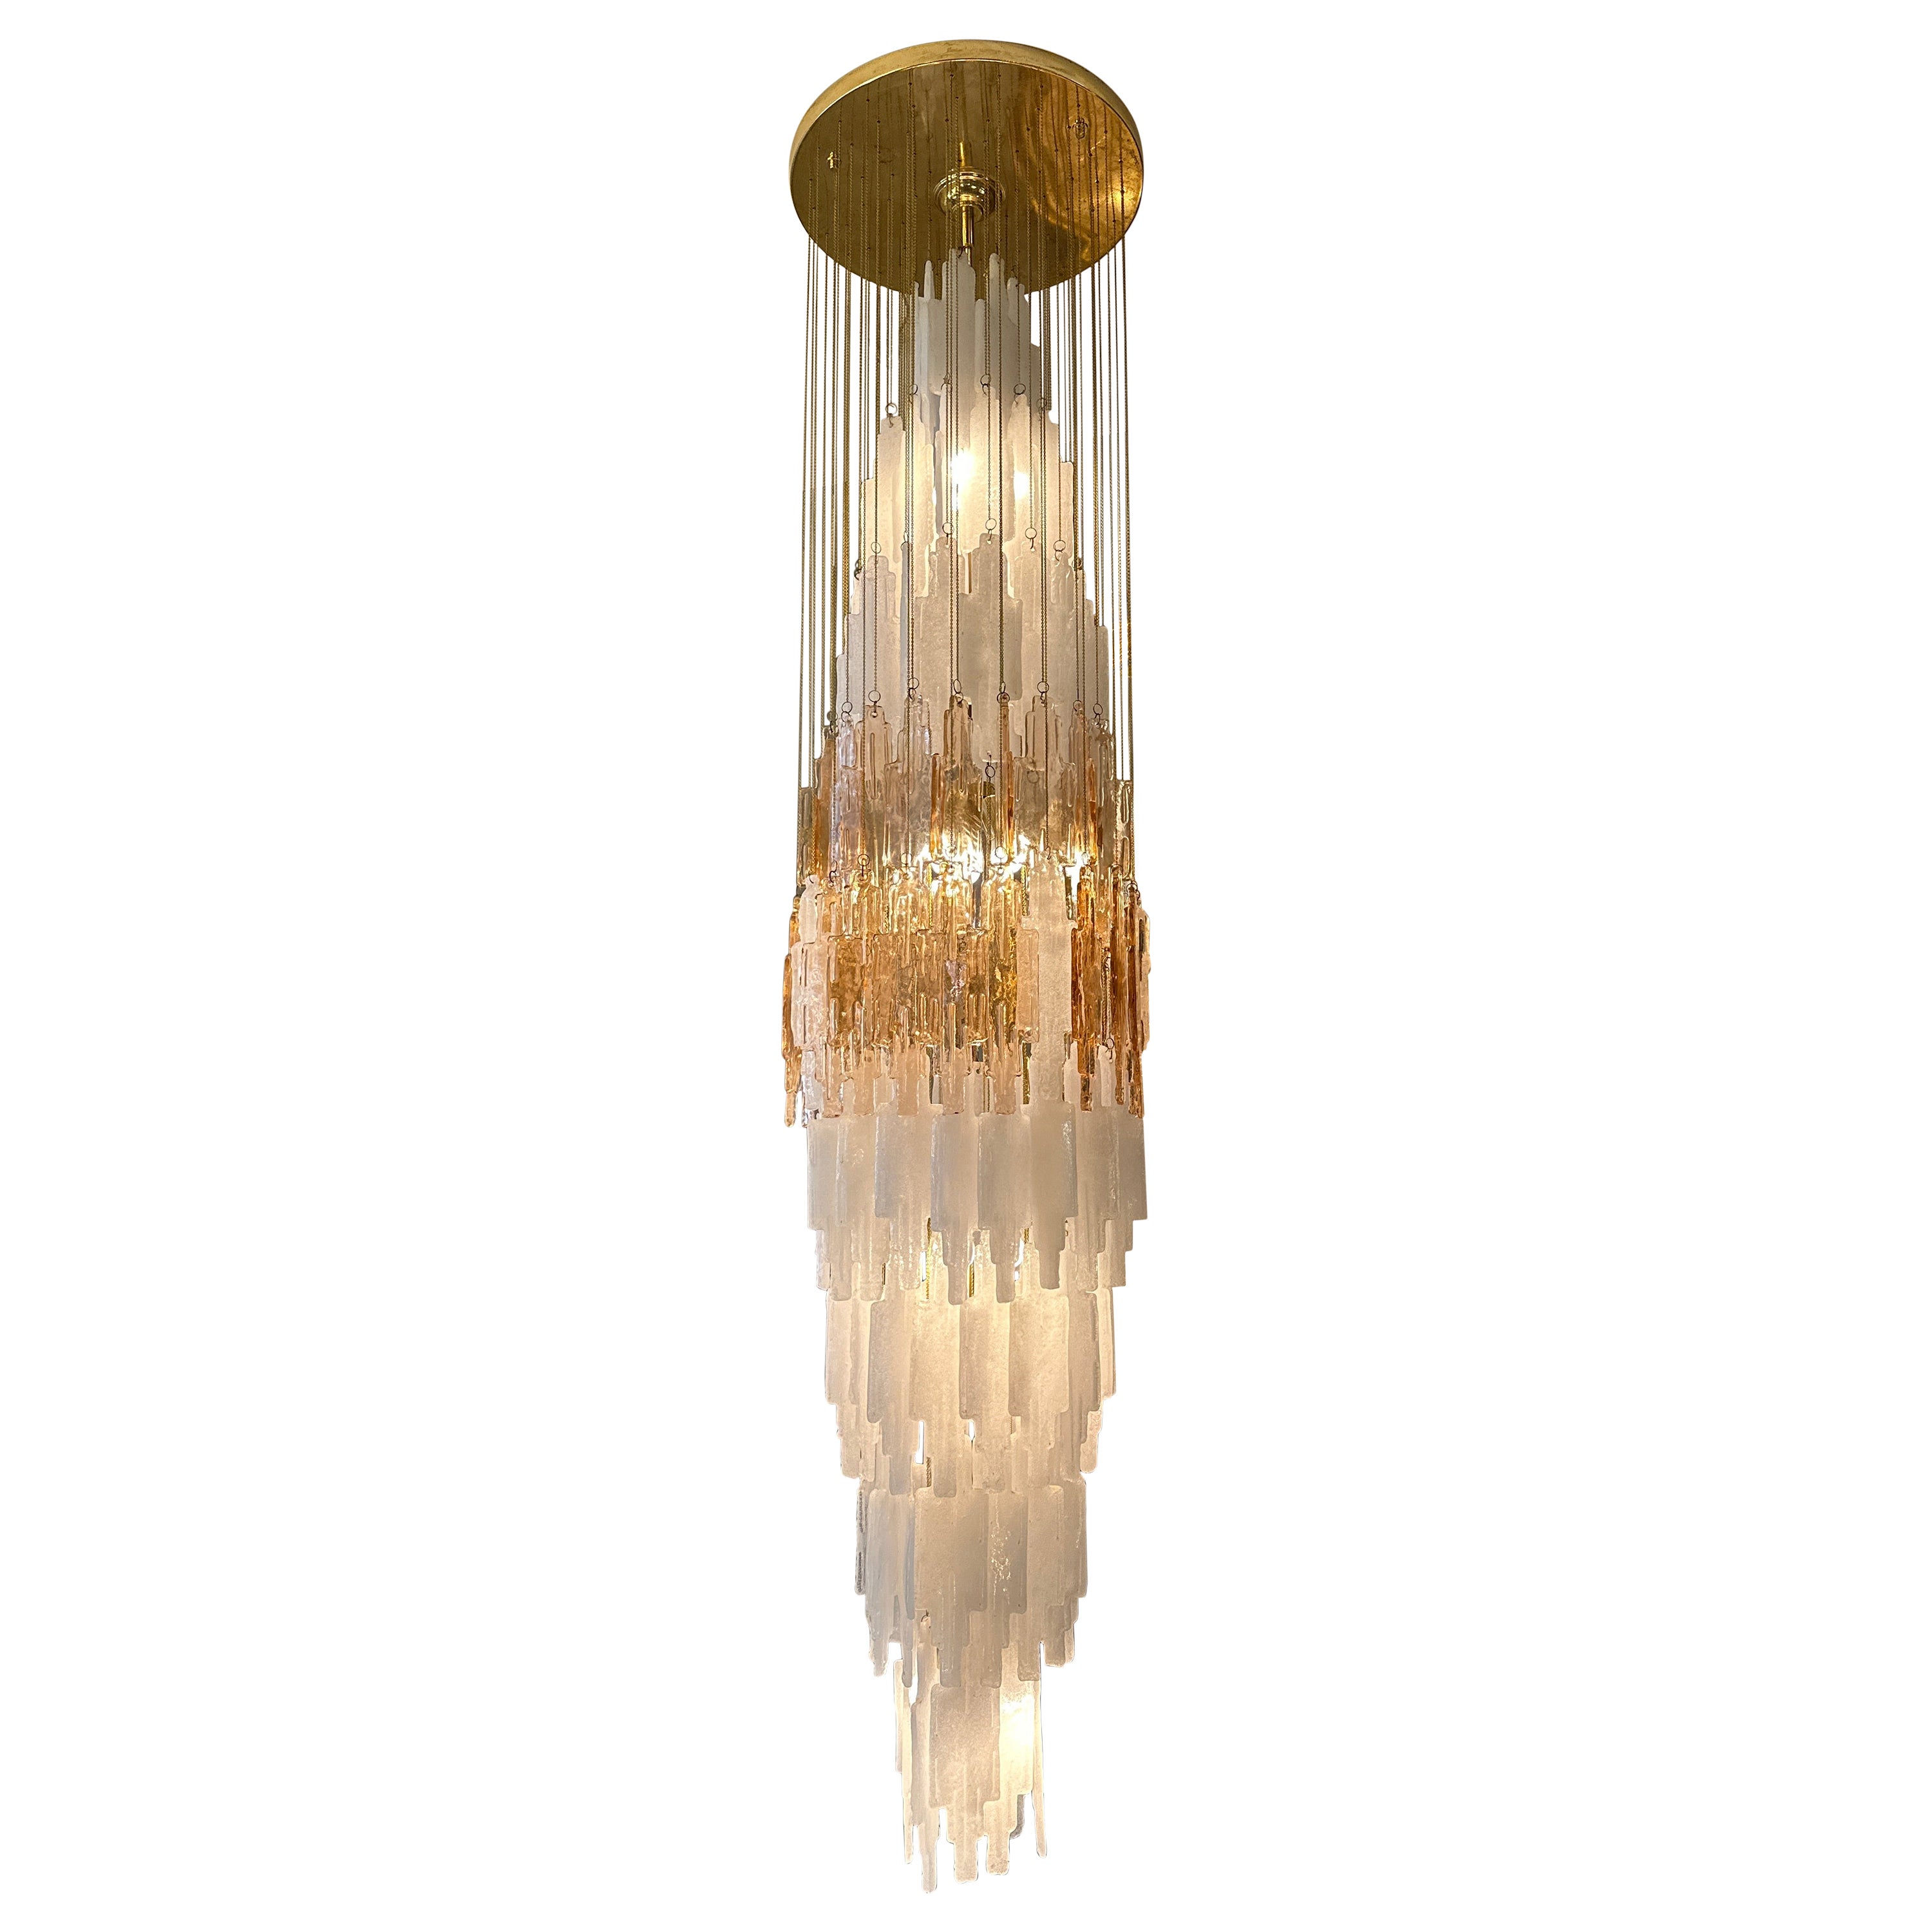 A Monumental Italian Murano Glass Waterfall Cascade Pendant By Poliarte  For Sale